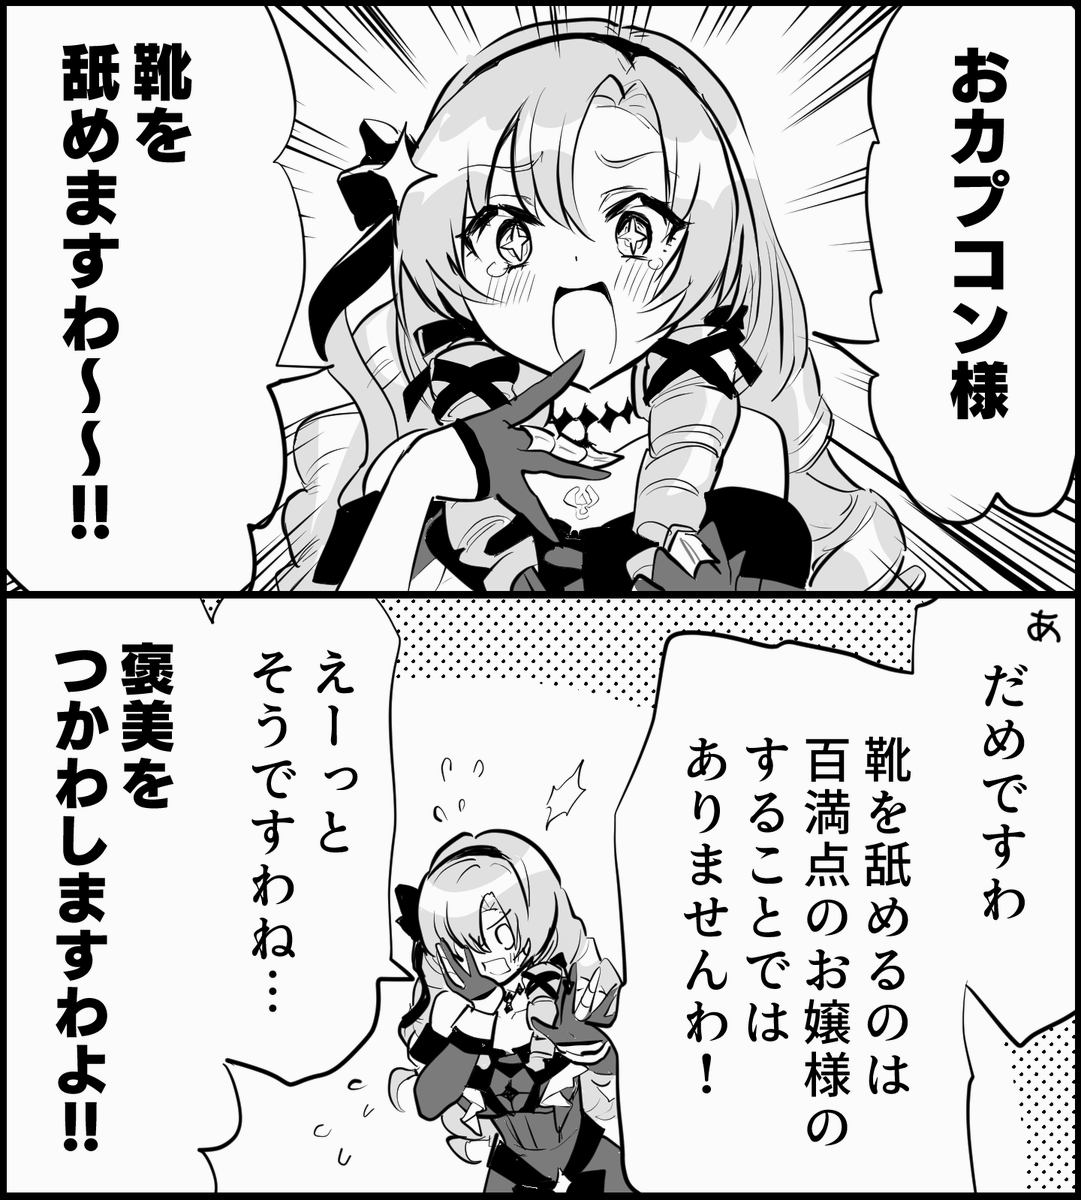 pixivに移植中です!

【切り抜き漫画】お嬢様とおカプコン様 #pixiv https://t.co/MgActRN2Xv 